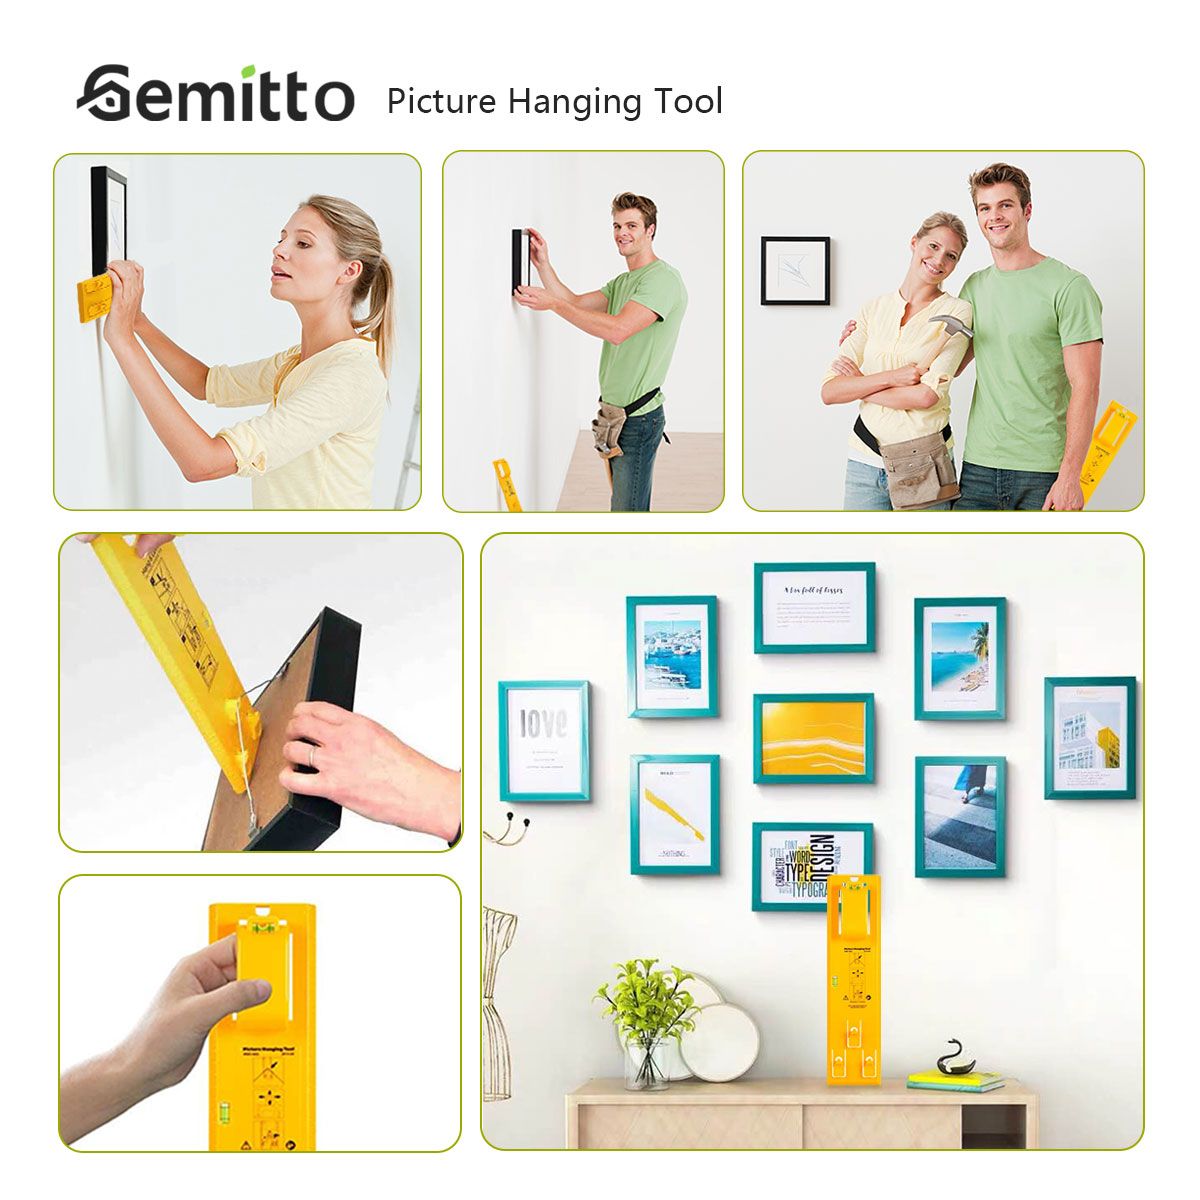 GEMITTO-100Pcs-Picture-Hanging-Tool-Kit-Picture-Level-Position-Tool-Picture-Hangers-Ruler-Frame-Hang-1748940